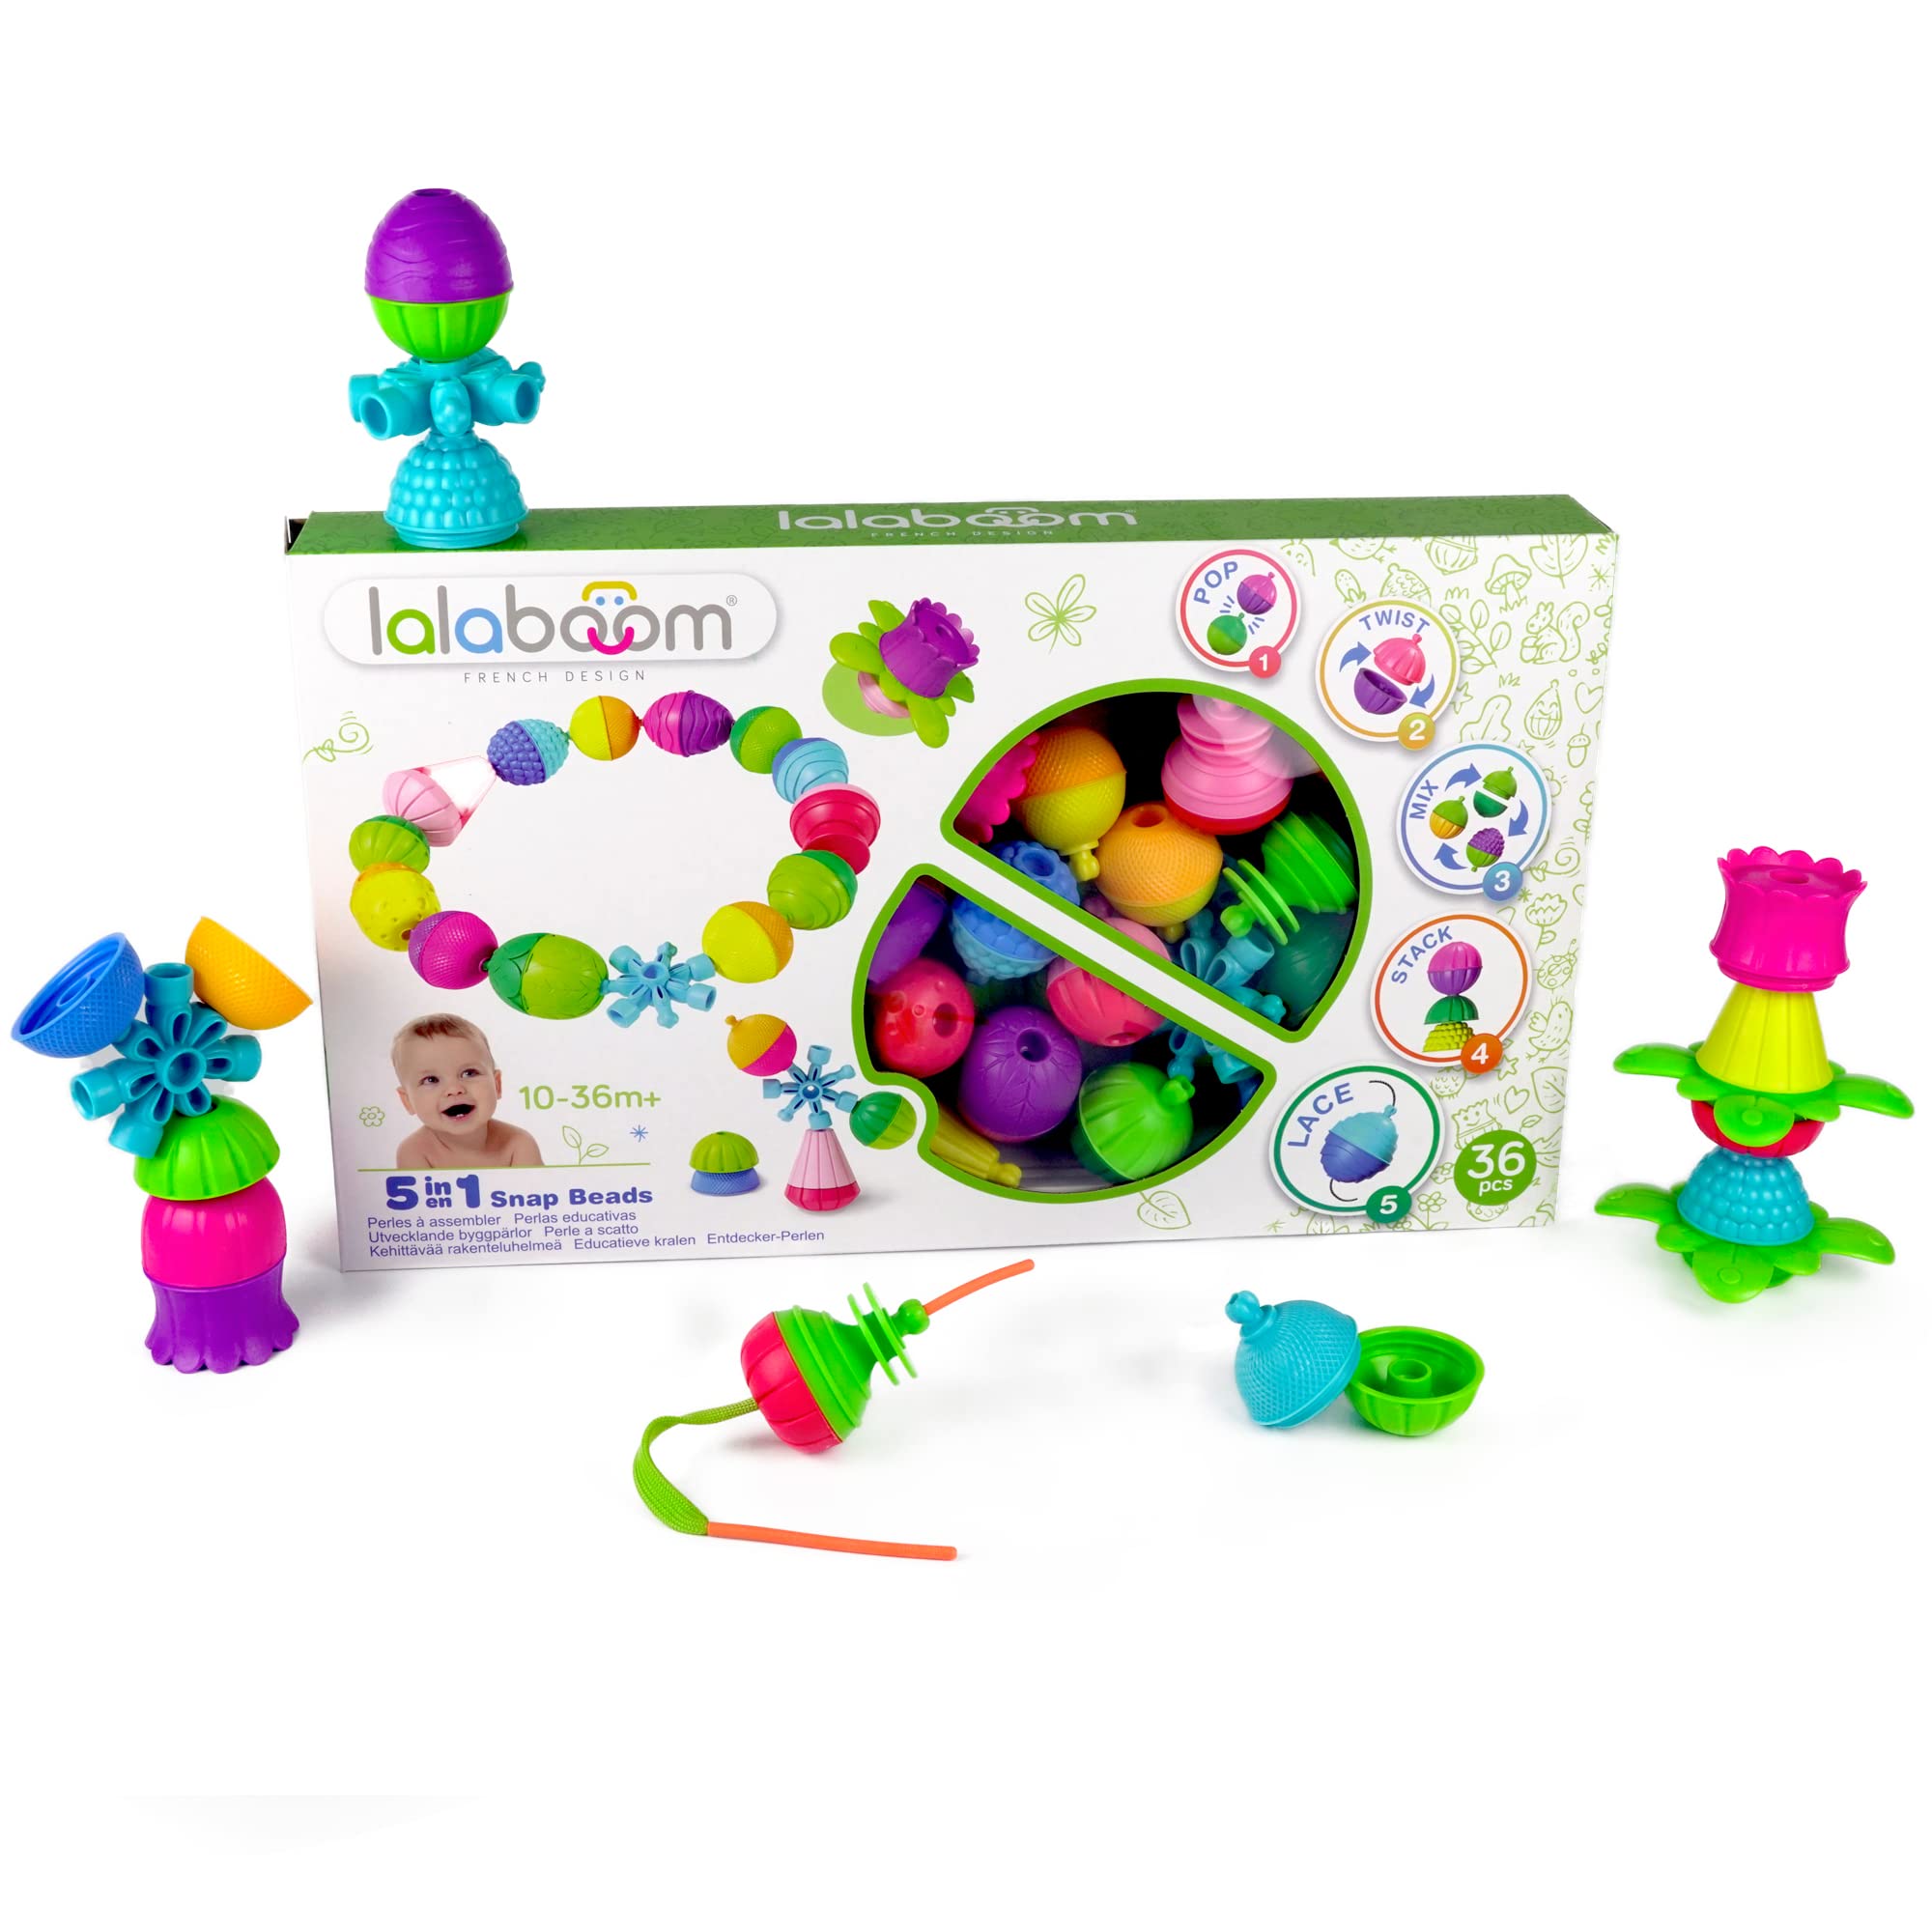 Lalaboom - Preschool Educational Beads - Montessori Shapes and Colors Construction Game and Learning Toy for Babies and Children from 10 Months to 4 Years Old - BL300, 36 Pieces